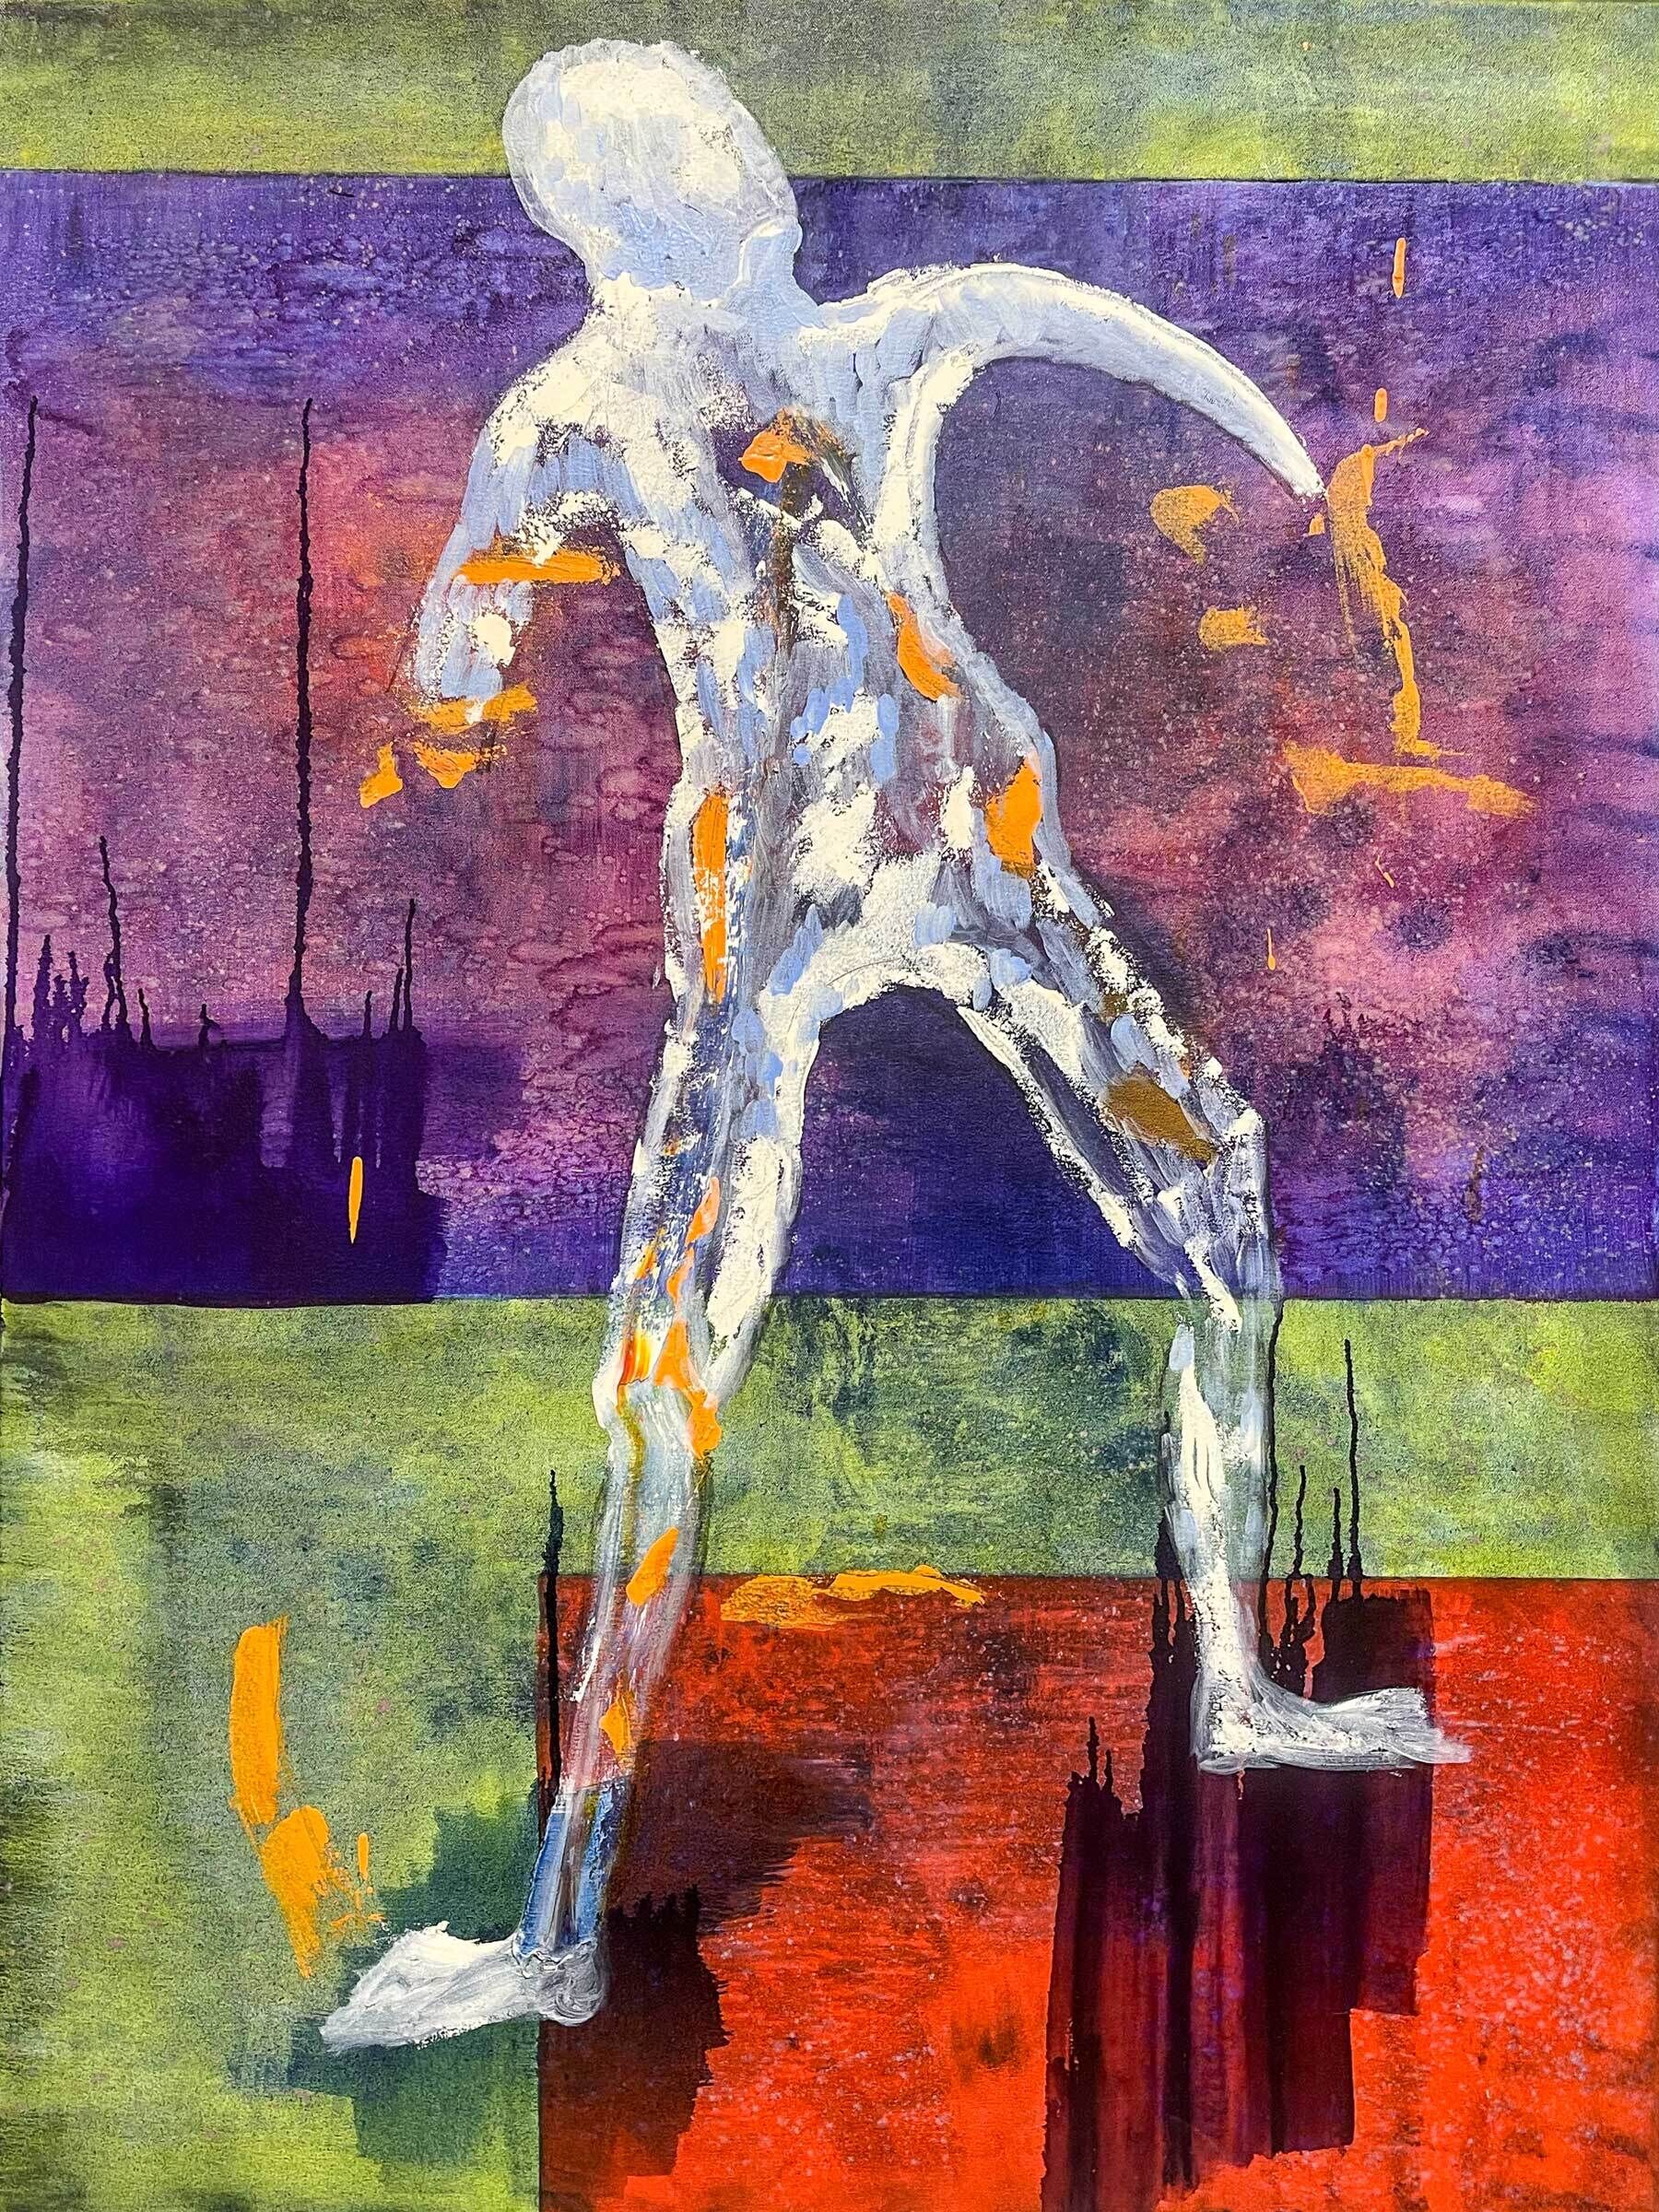 An abstract painting with a white figure against a green, purple, and red background.